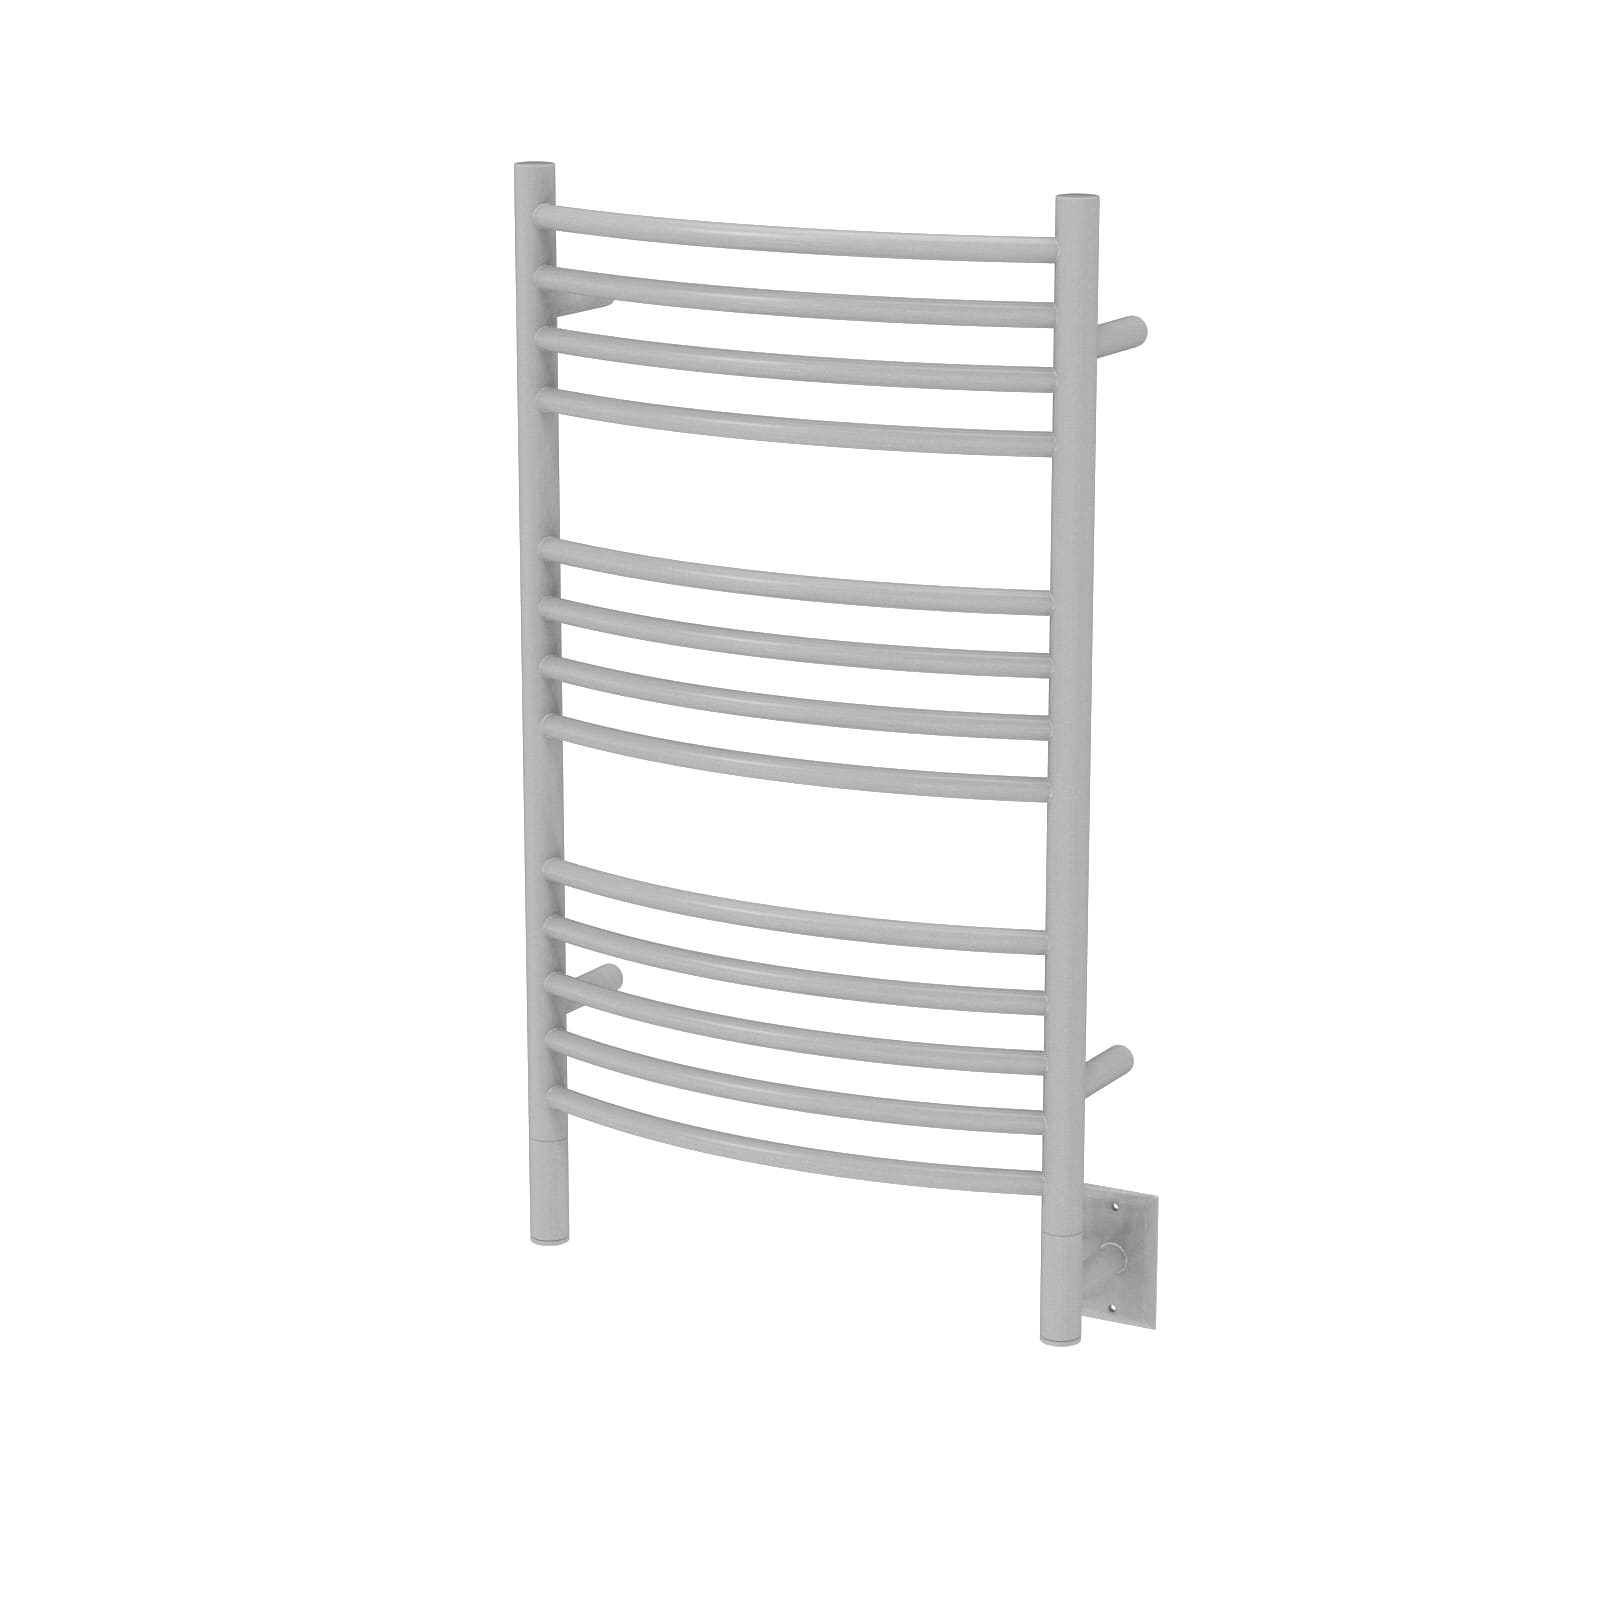 Amba, Amba Jeeves CCW Towel Warmer with 13 Curved Bars in White